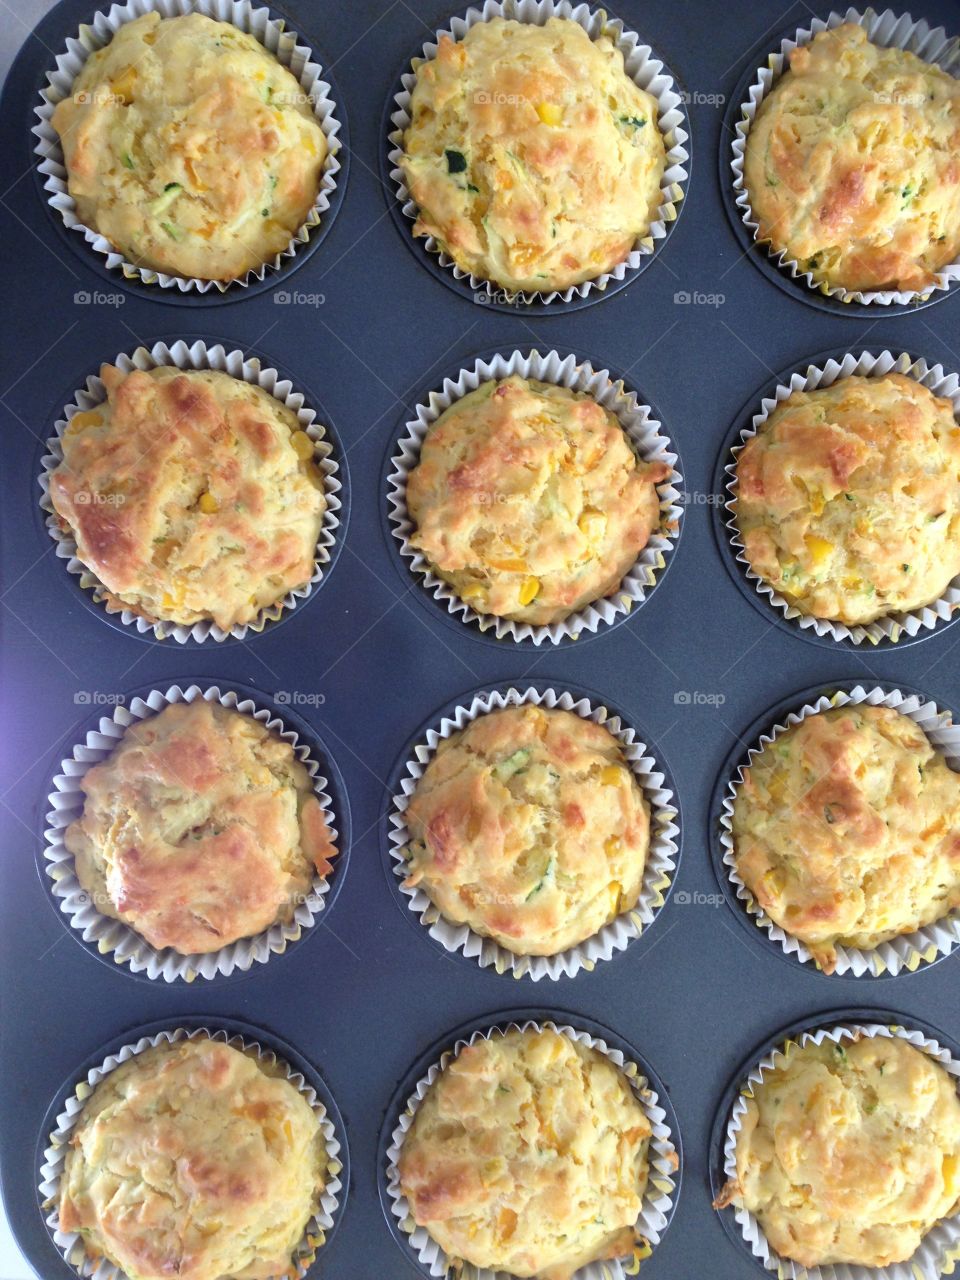 Home cooked muffins